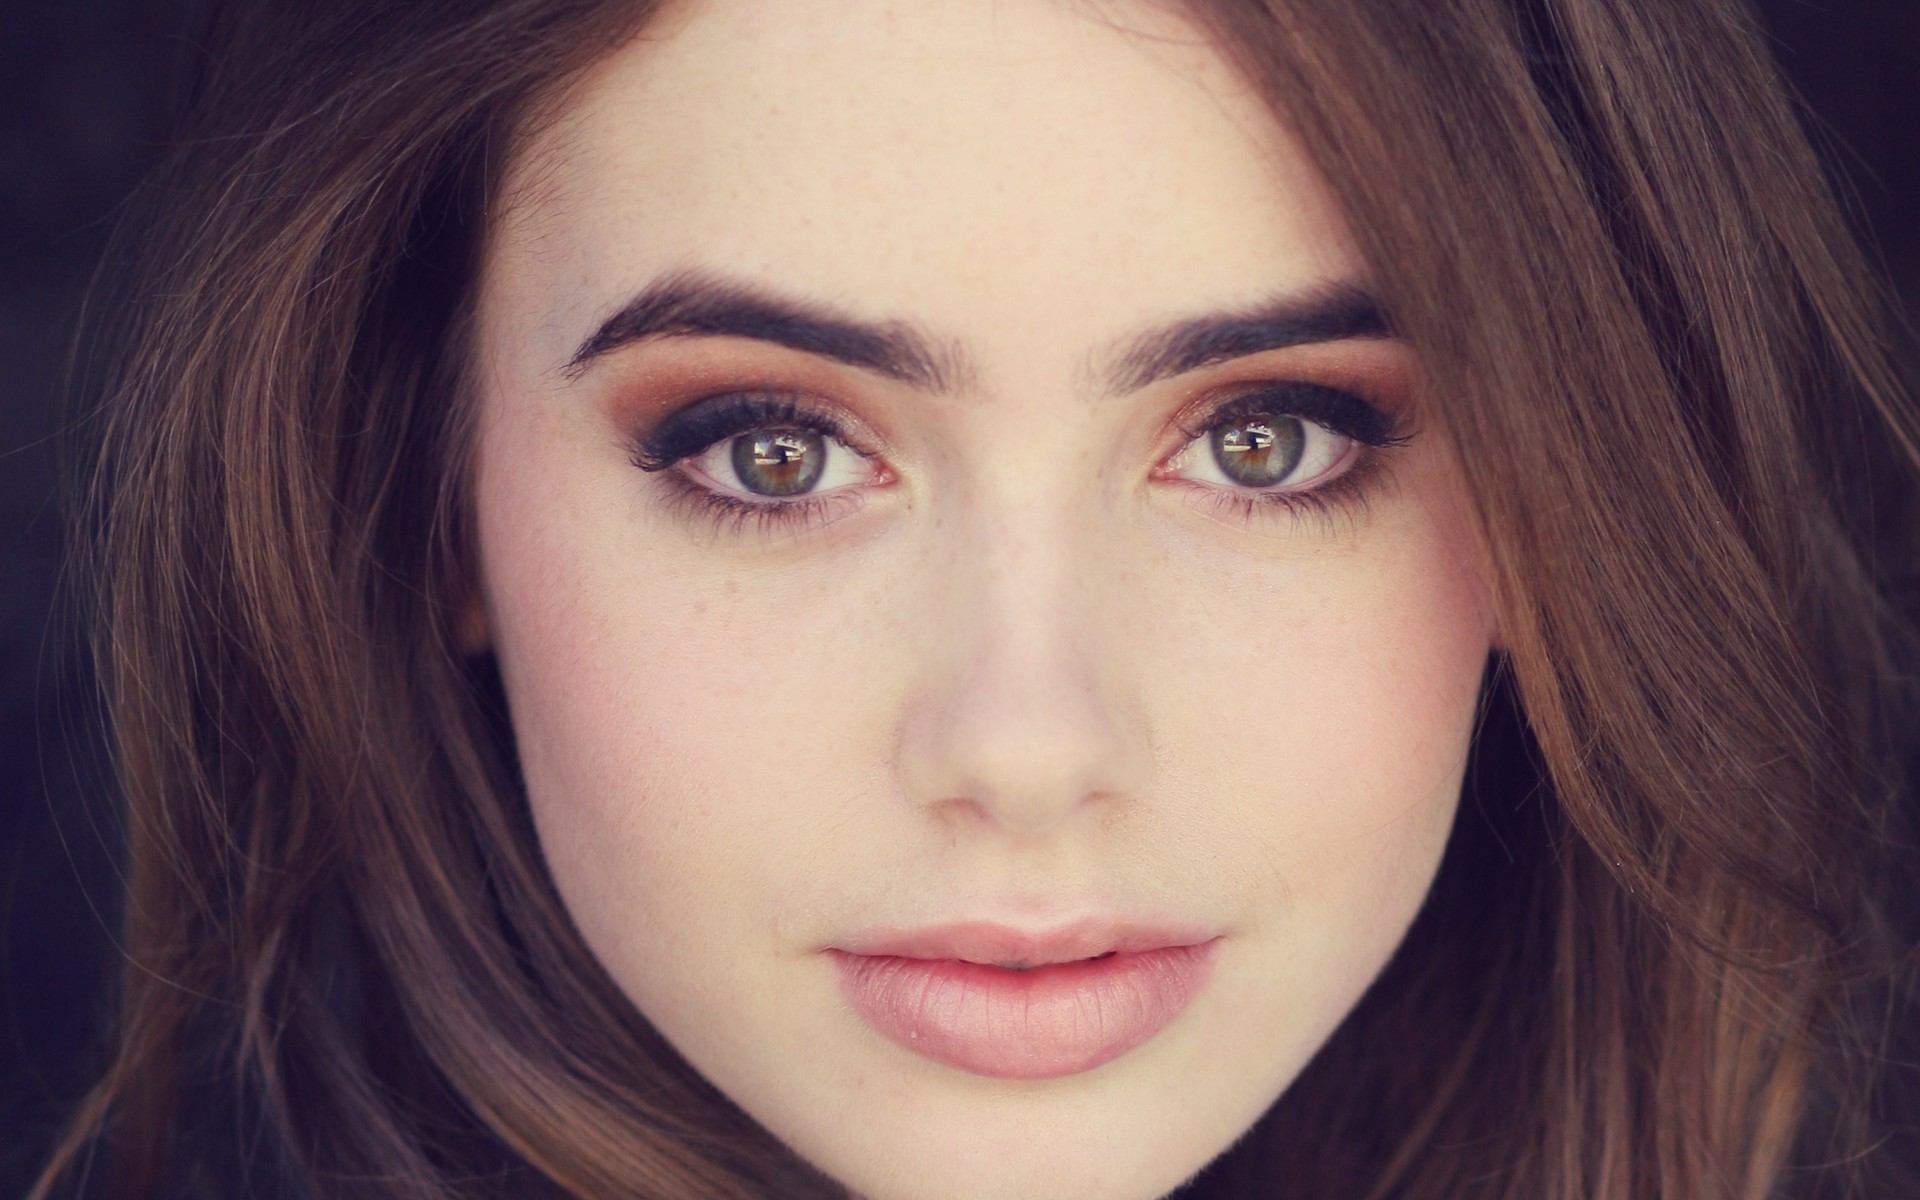 Lily Collins HD Wallpapers Backgrounds Wallpaper HD Wallpapers Pinterest Lily collins, Hd wallpaper and Wallpaper